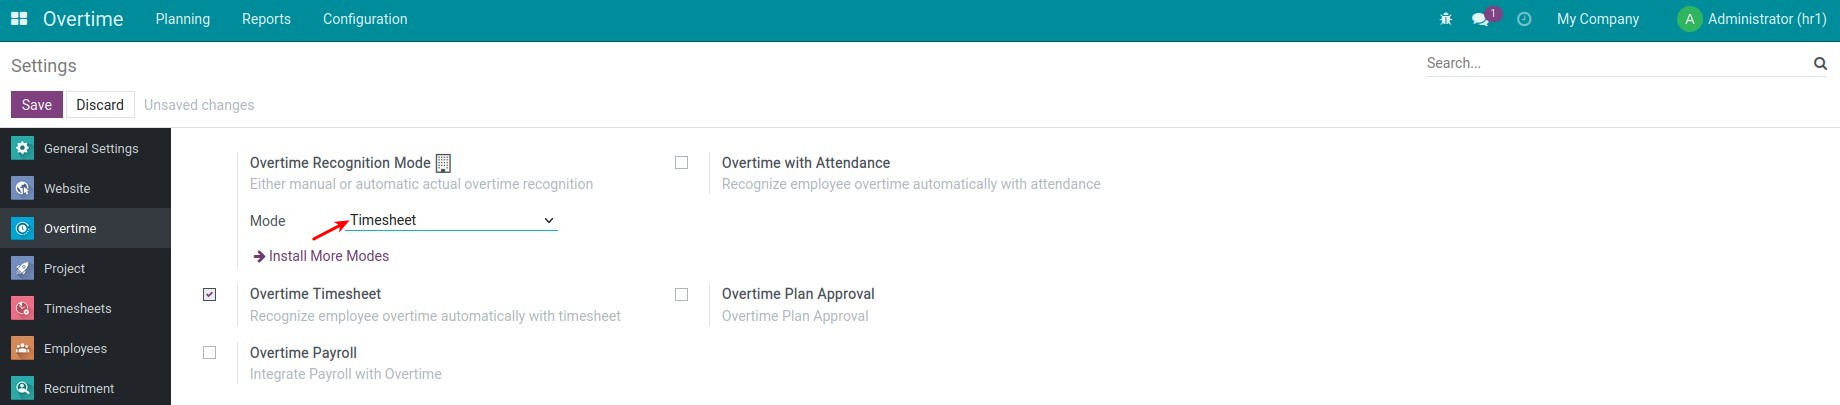 The default Overtime Recognition Mode for the company